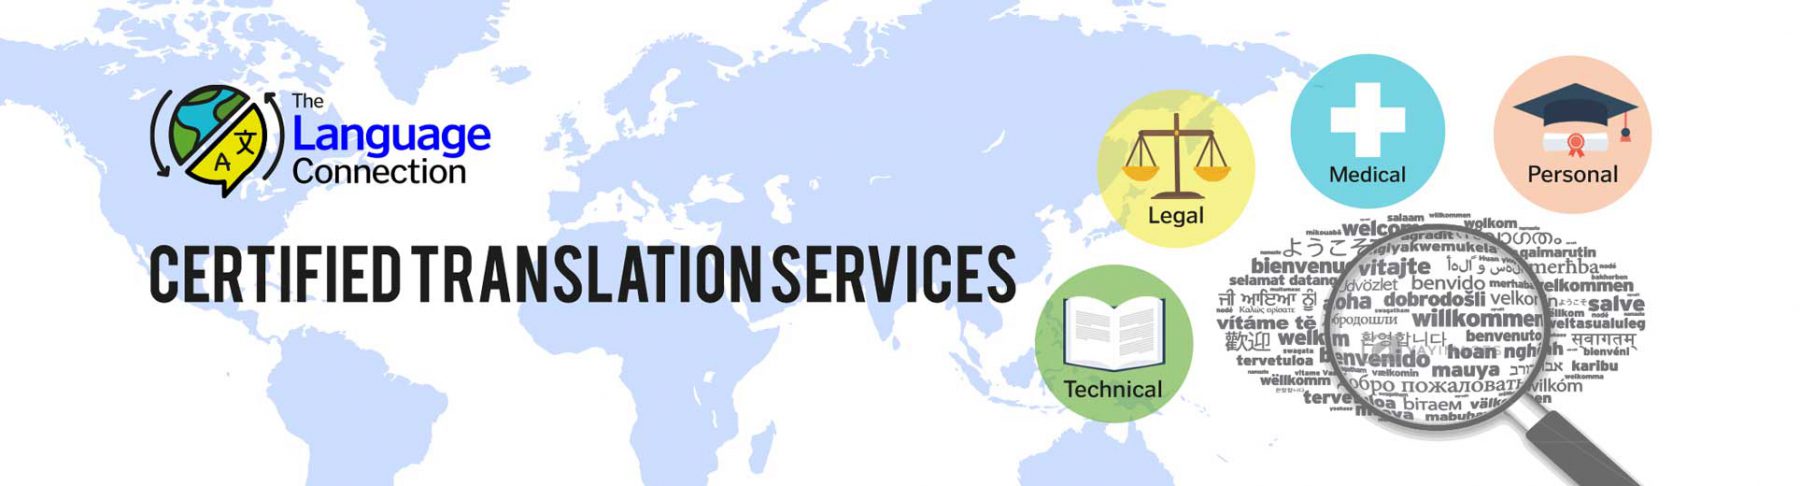 CERTIFIED TRANSLATION SERVICES BY THE LANGUAGE CONNECTION